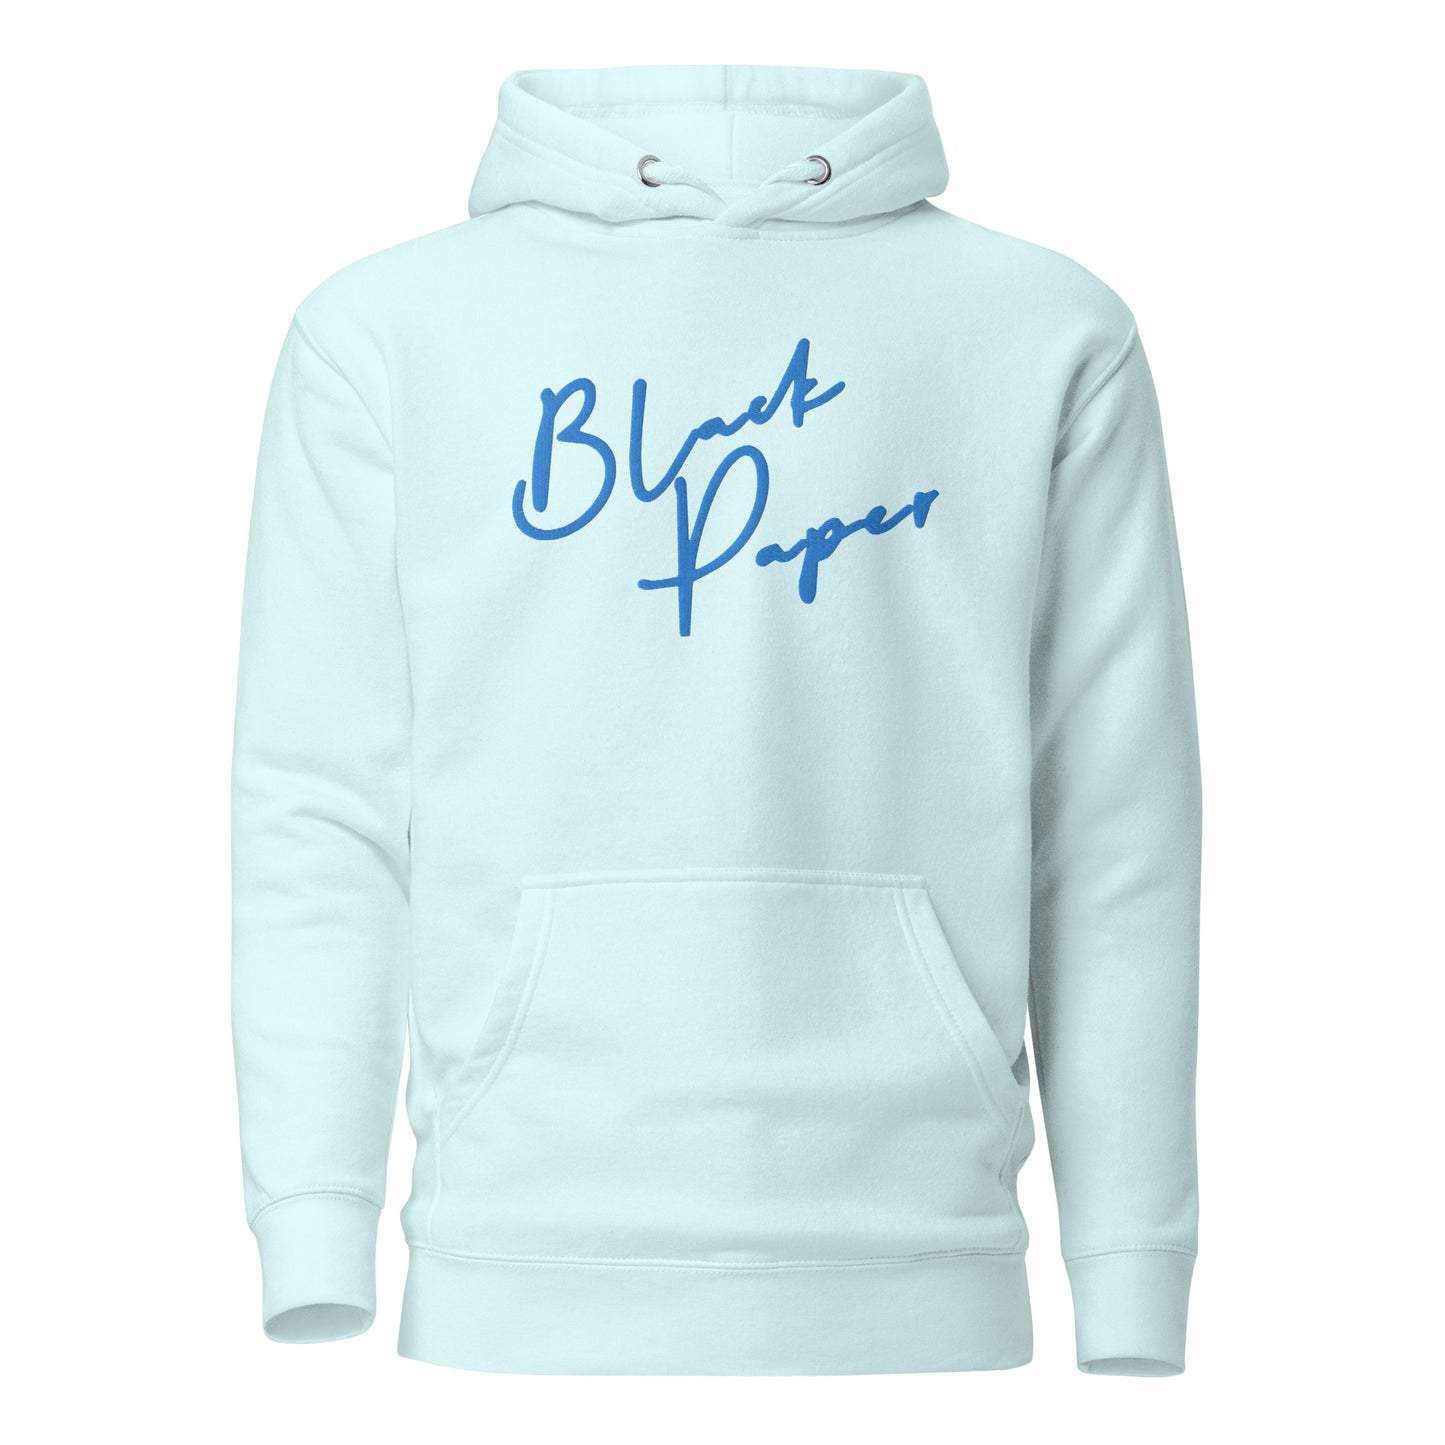 Hoodie - Signed by (front embroidery)